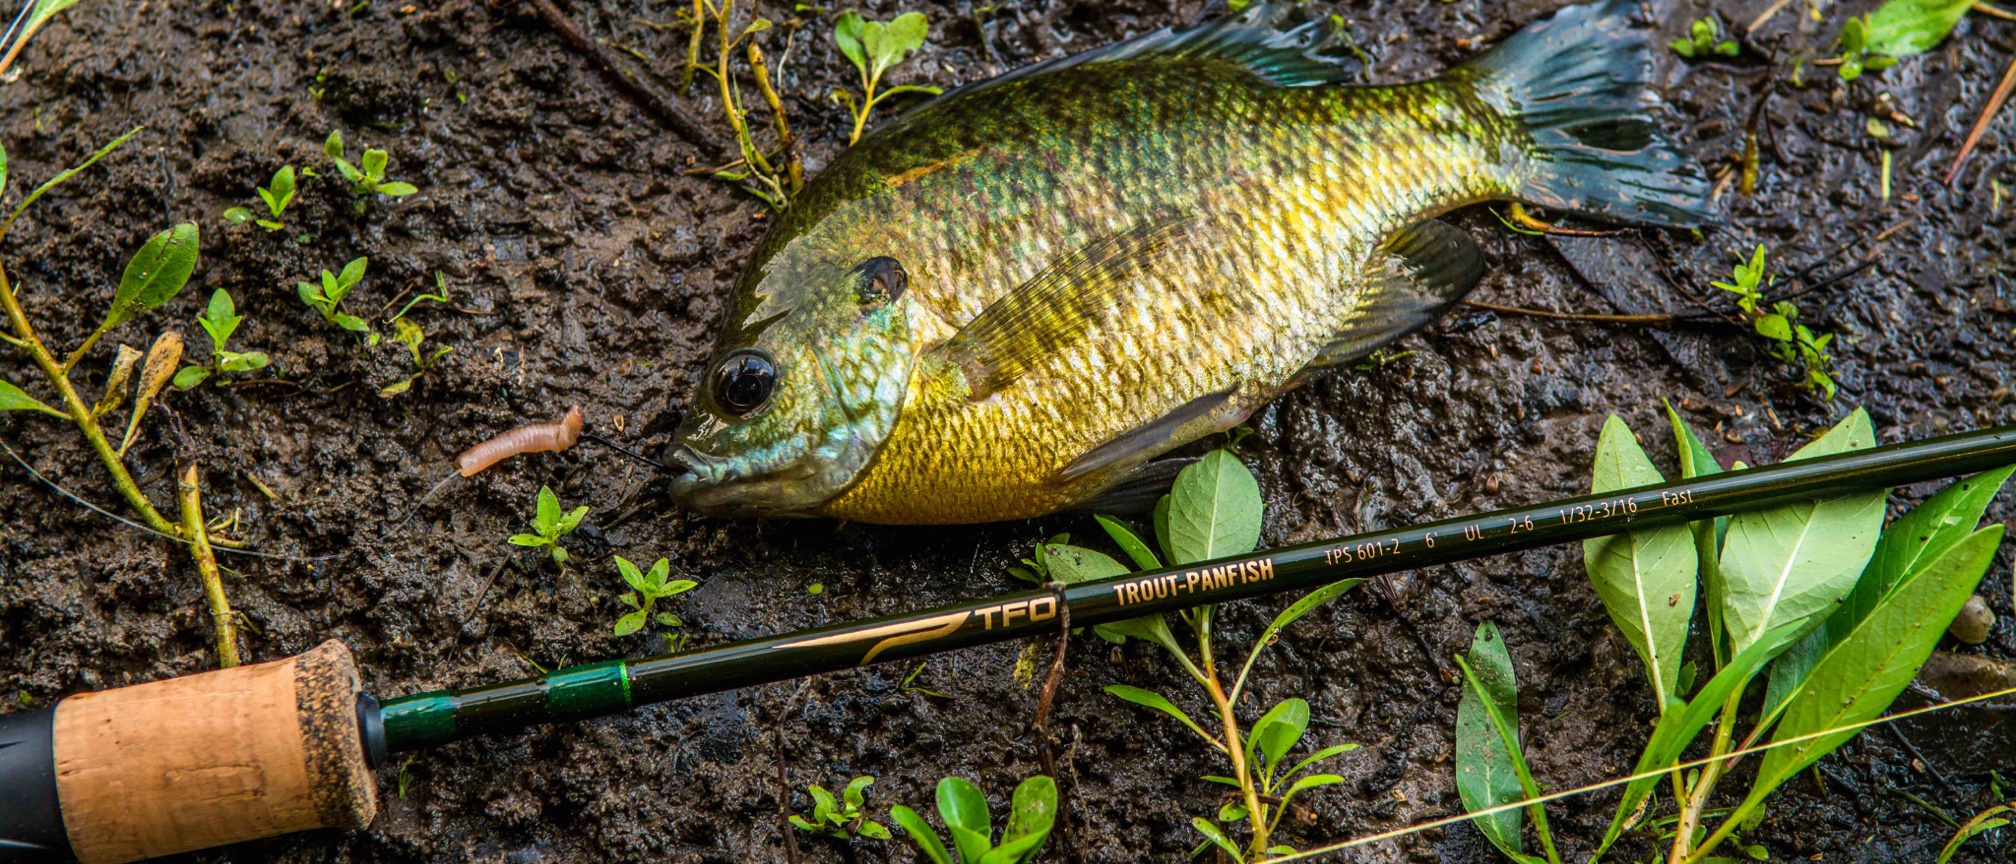 good length for ultralight panfish rod? 5' or 6'? for lake - Other